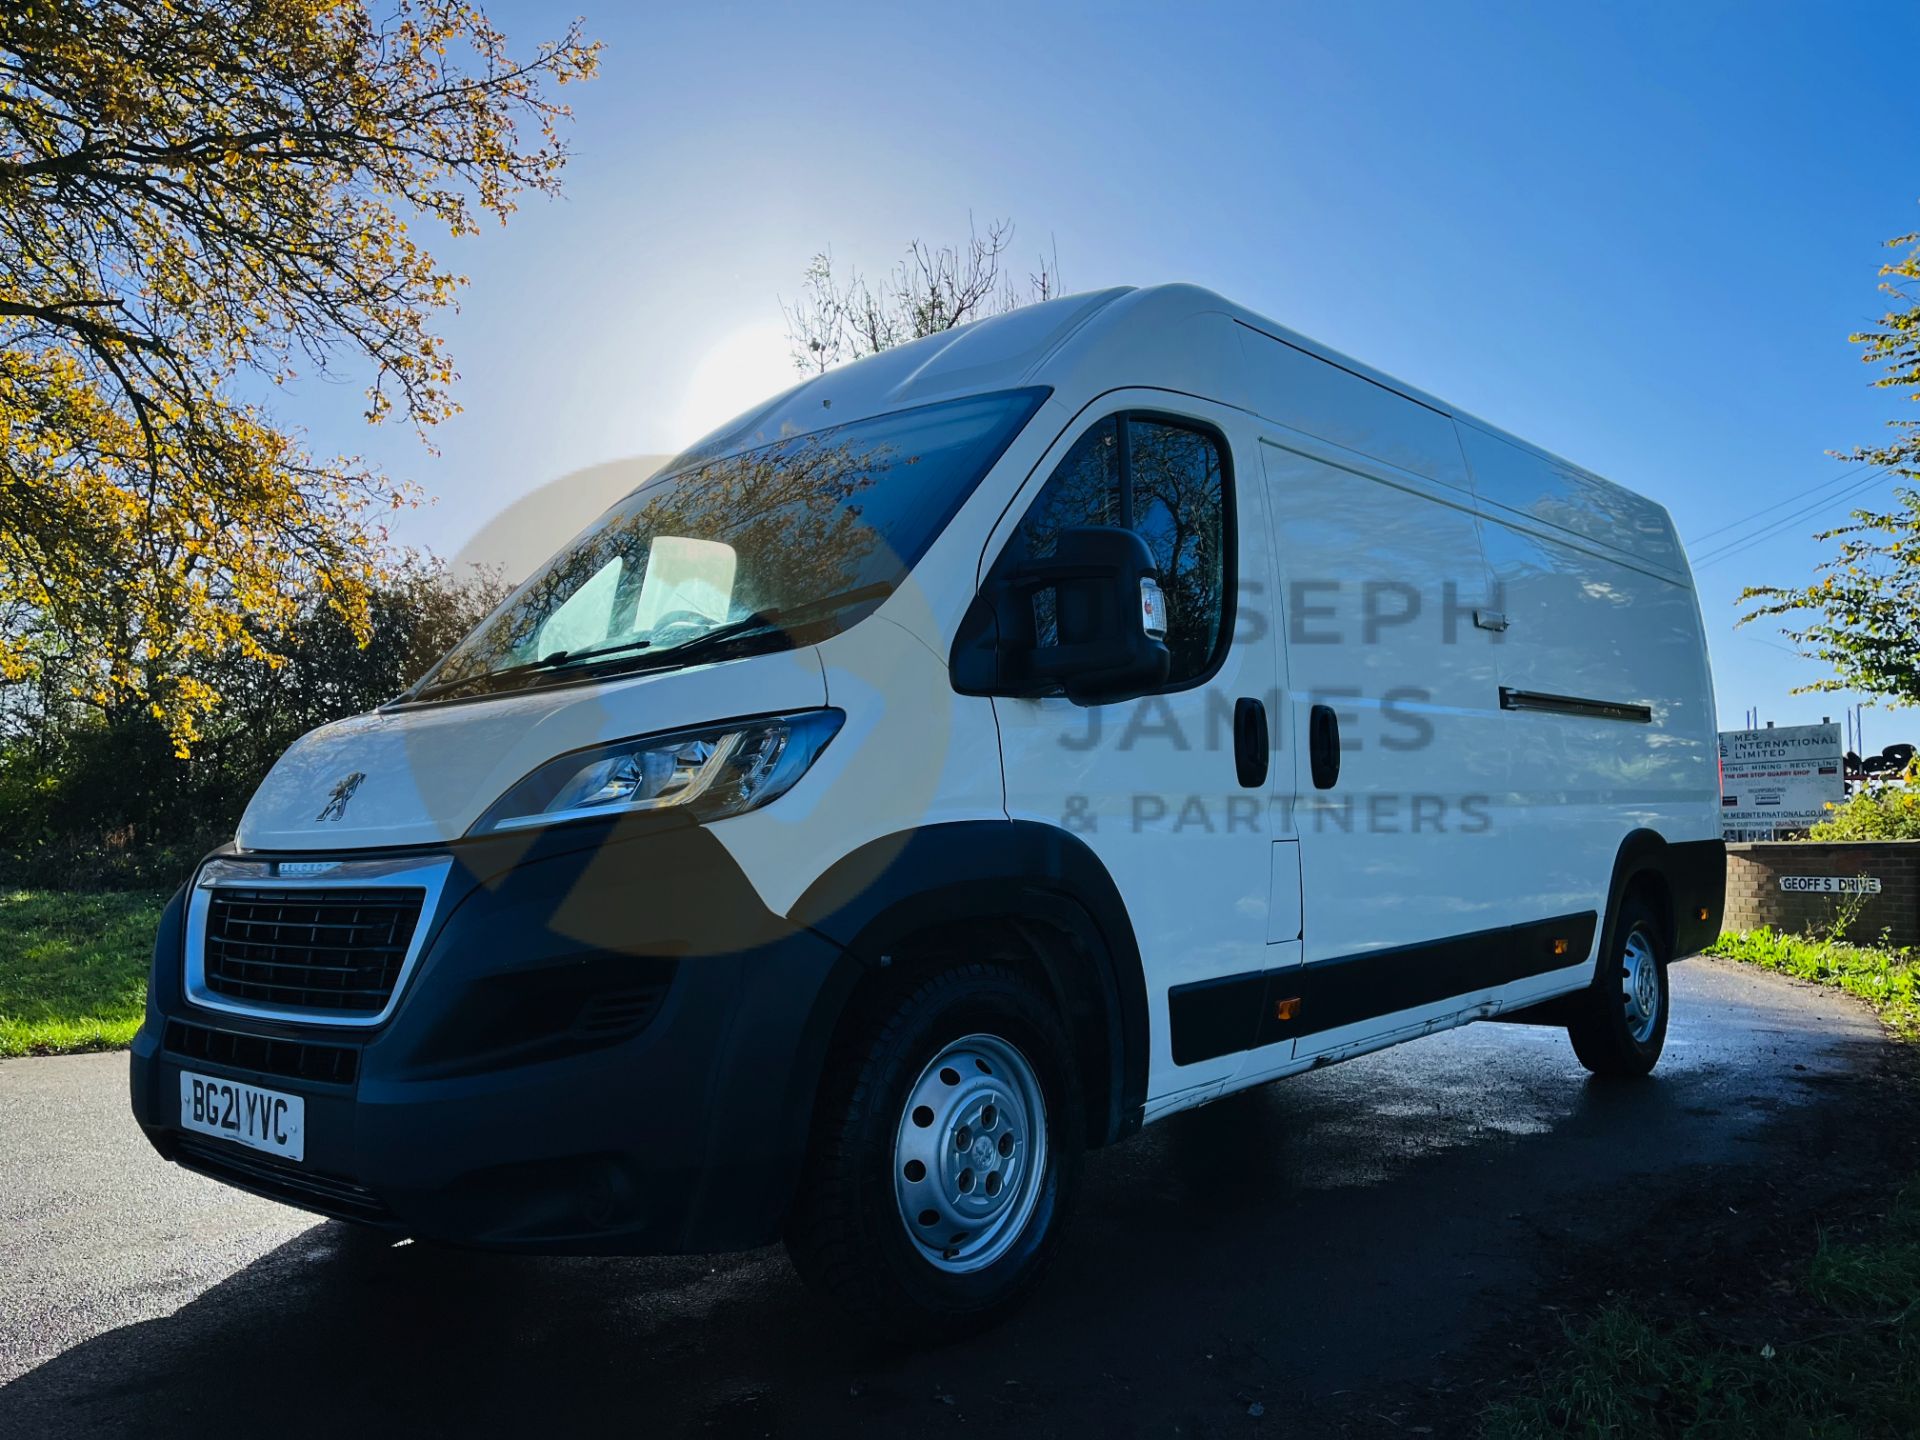 (ON SALE) PEUGEOT BOXER 2.2 BLUE-HDI "PROFESSIONAL" LWB MAXI 435 (2021 MODEL) SAT NAV (AIR CON) - Image 5 of 22